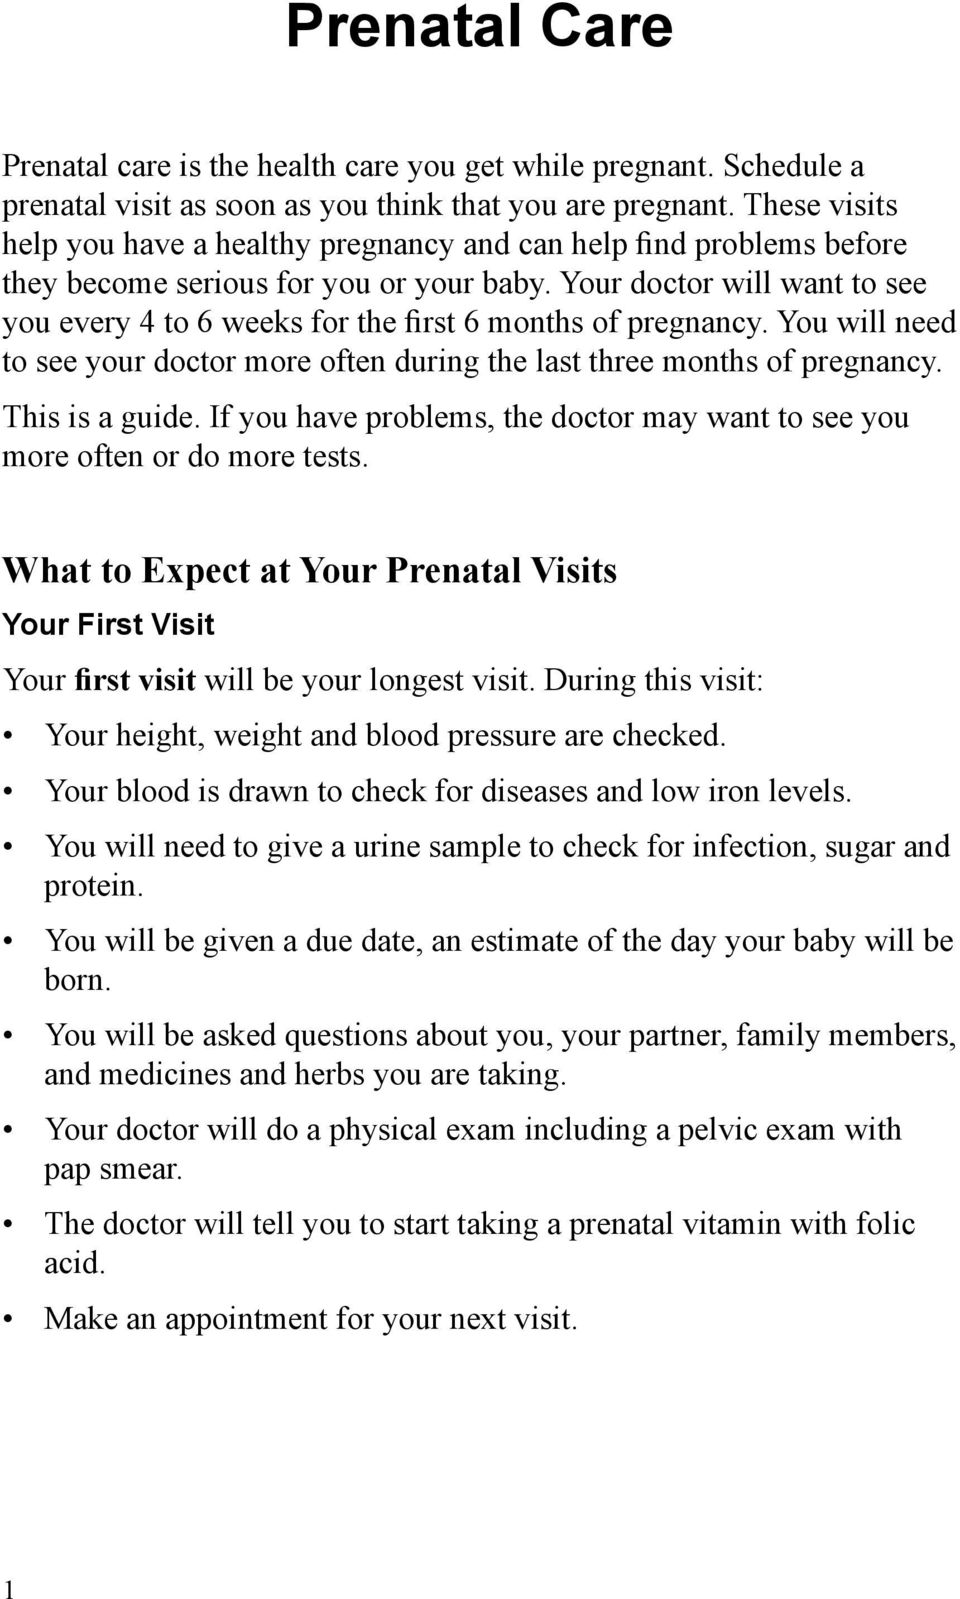 Your doctor will want to see you every 4 to 6 weeks for the first 6 months of pregnancy. You will need to see your doctor more often during the last three months of pregnancy. This is a guide.